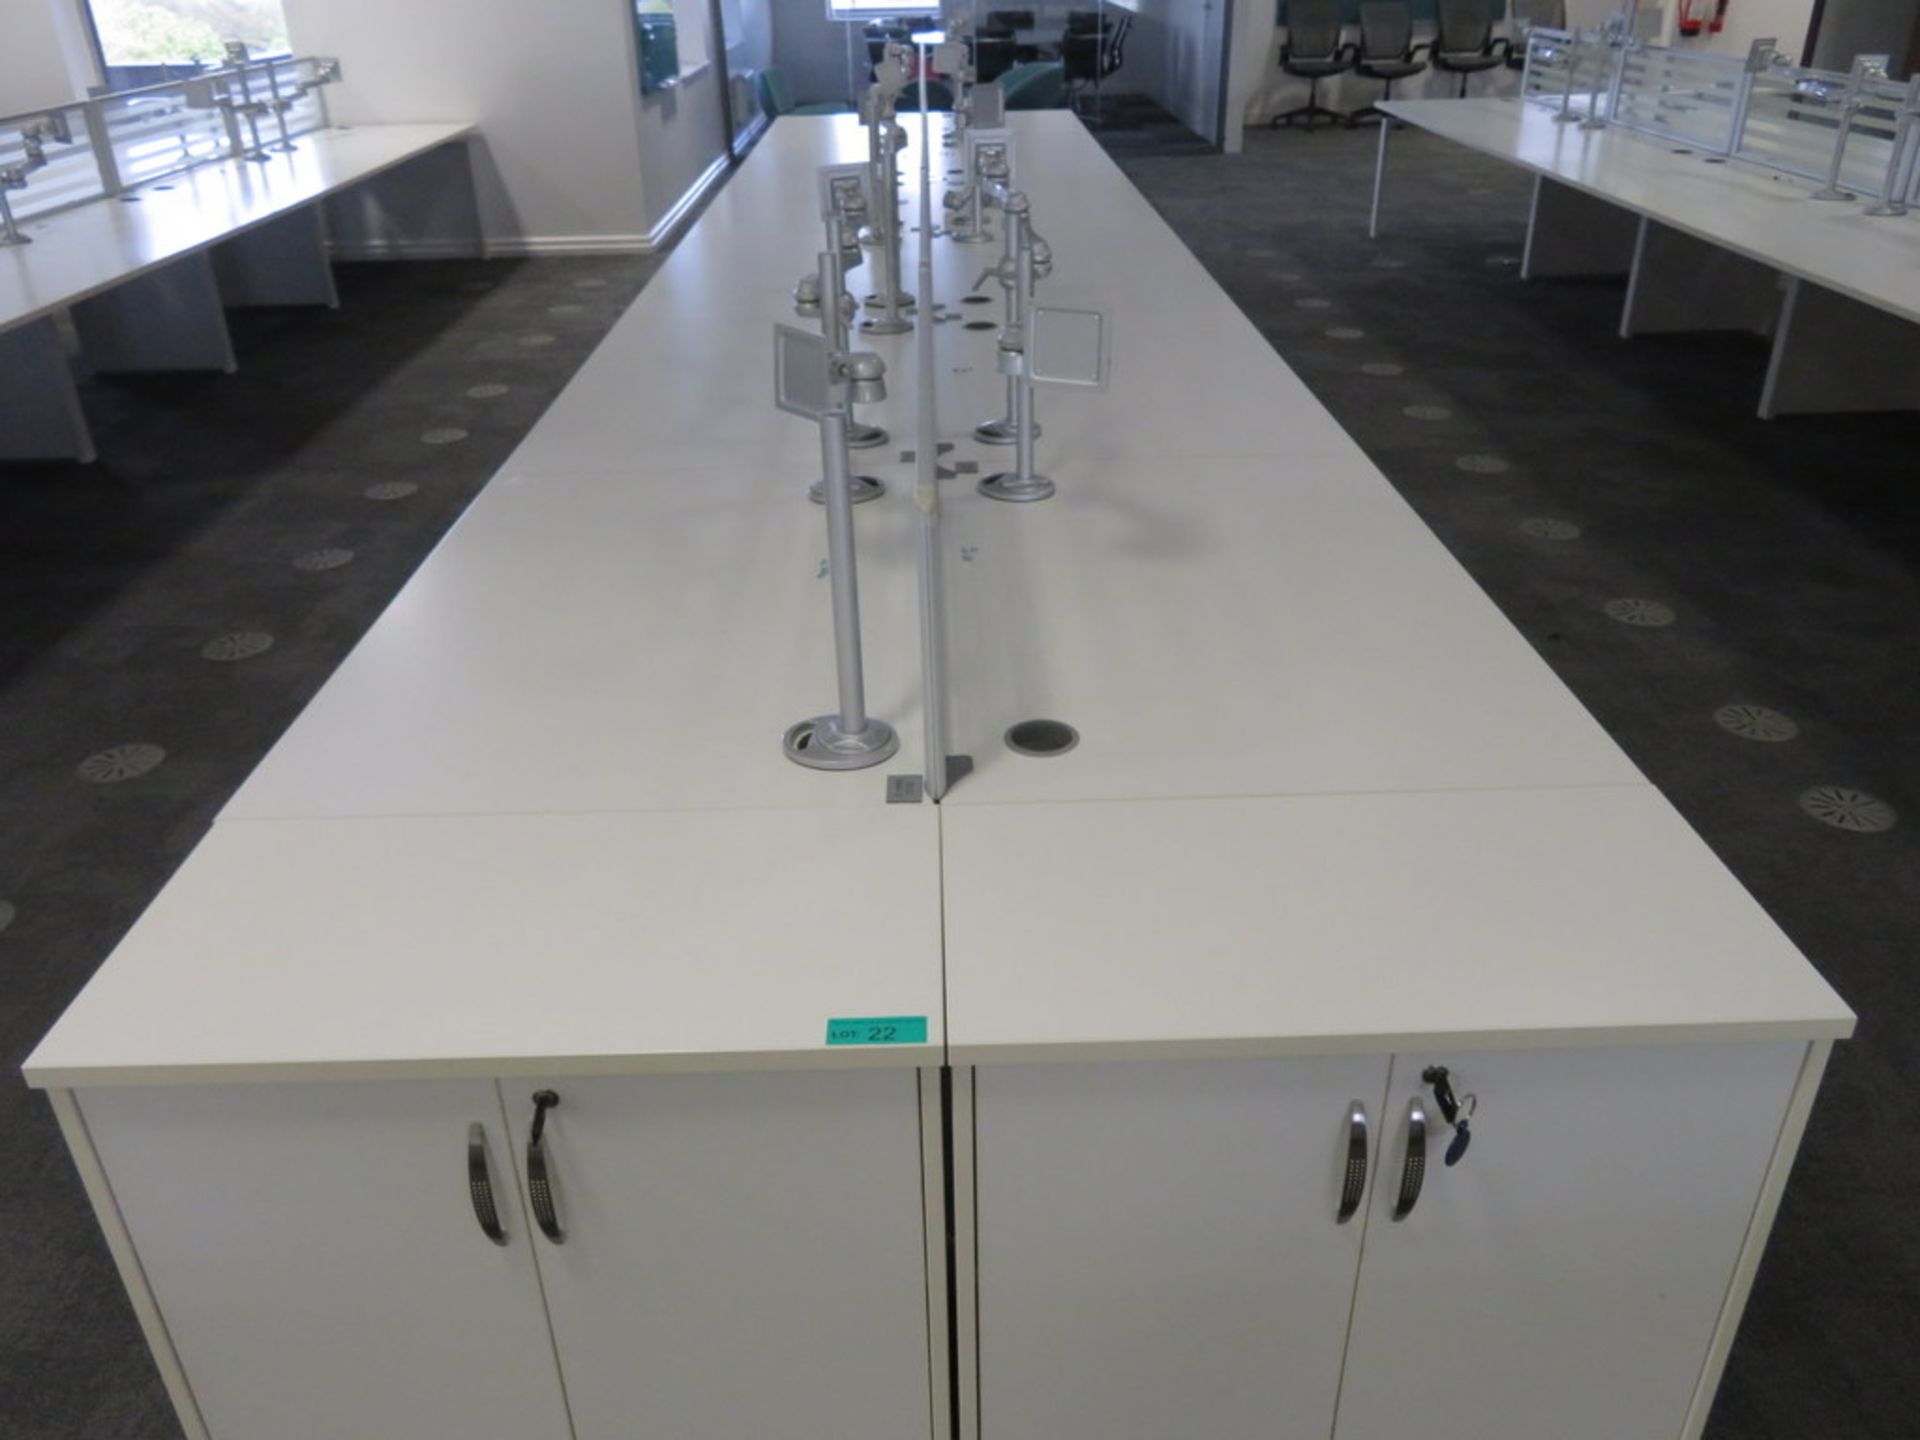 12 Person Desk Arrangement With Dividers, Monitor Arms & Storage Cupboards. - Image 2 of 4